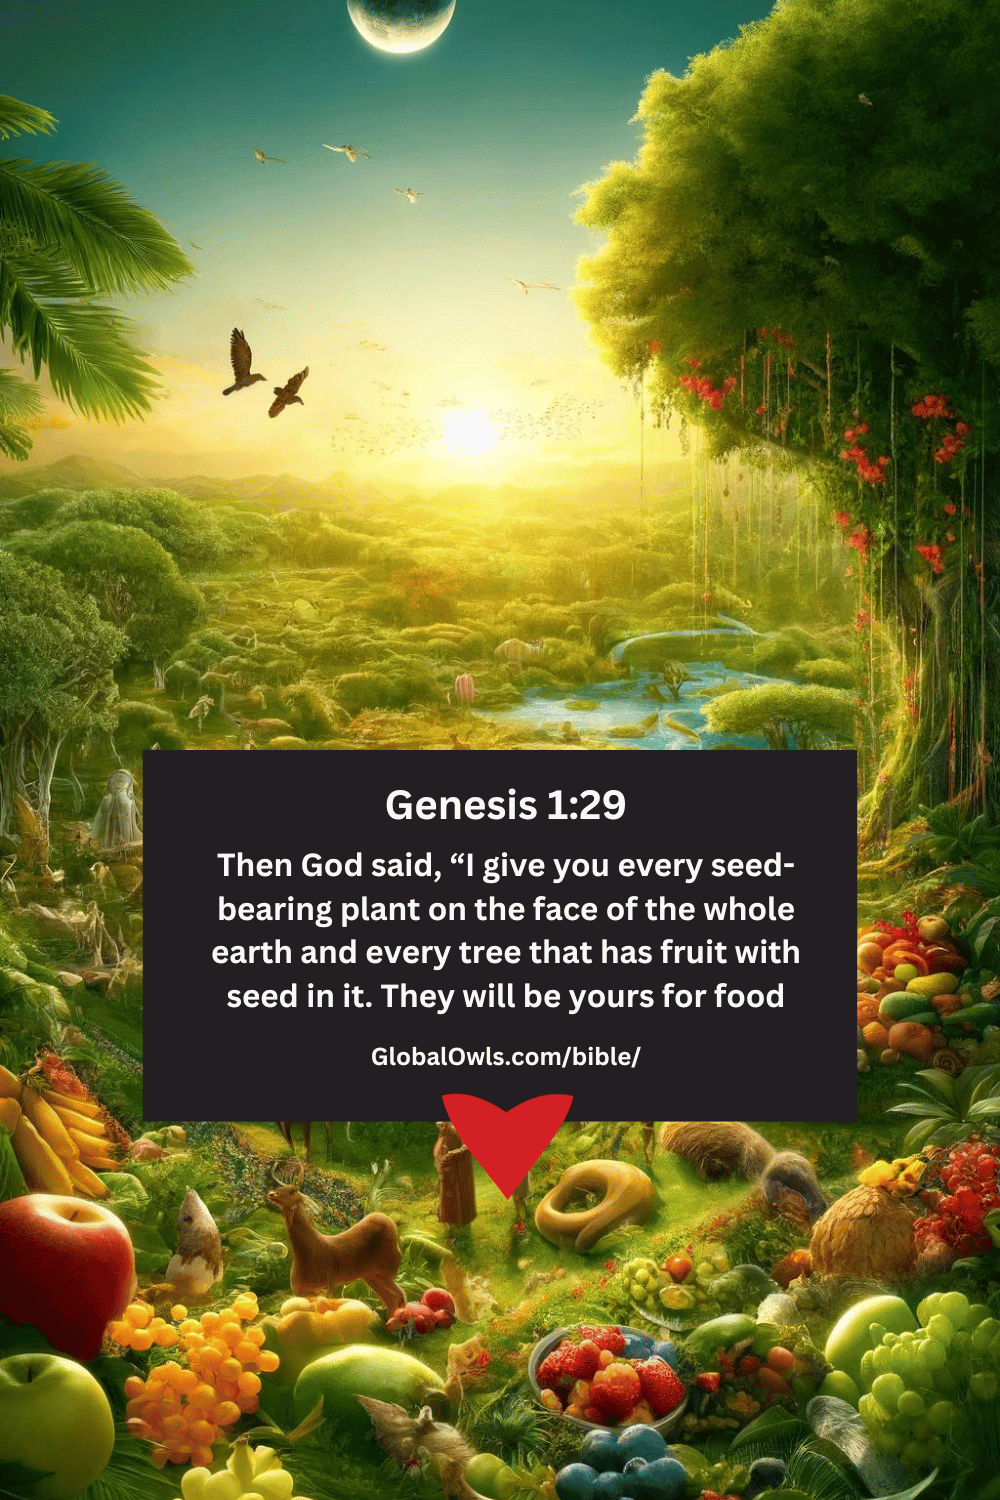 Genesis 1-29 Then God said, “I give you every seed-bearing plant on the face of the whole earth and every tree that has fruit with seed in it. They will be yours for food